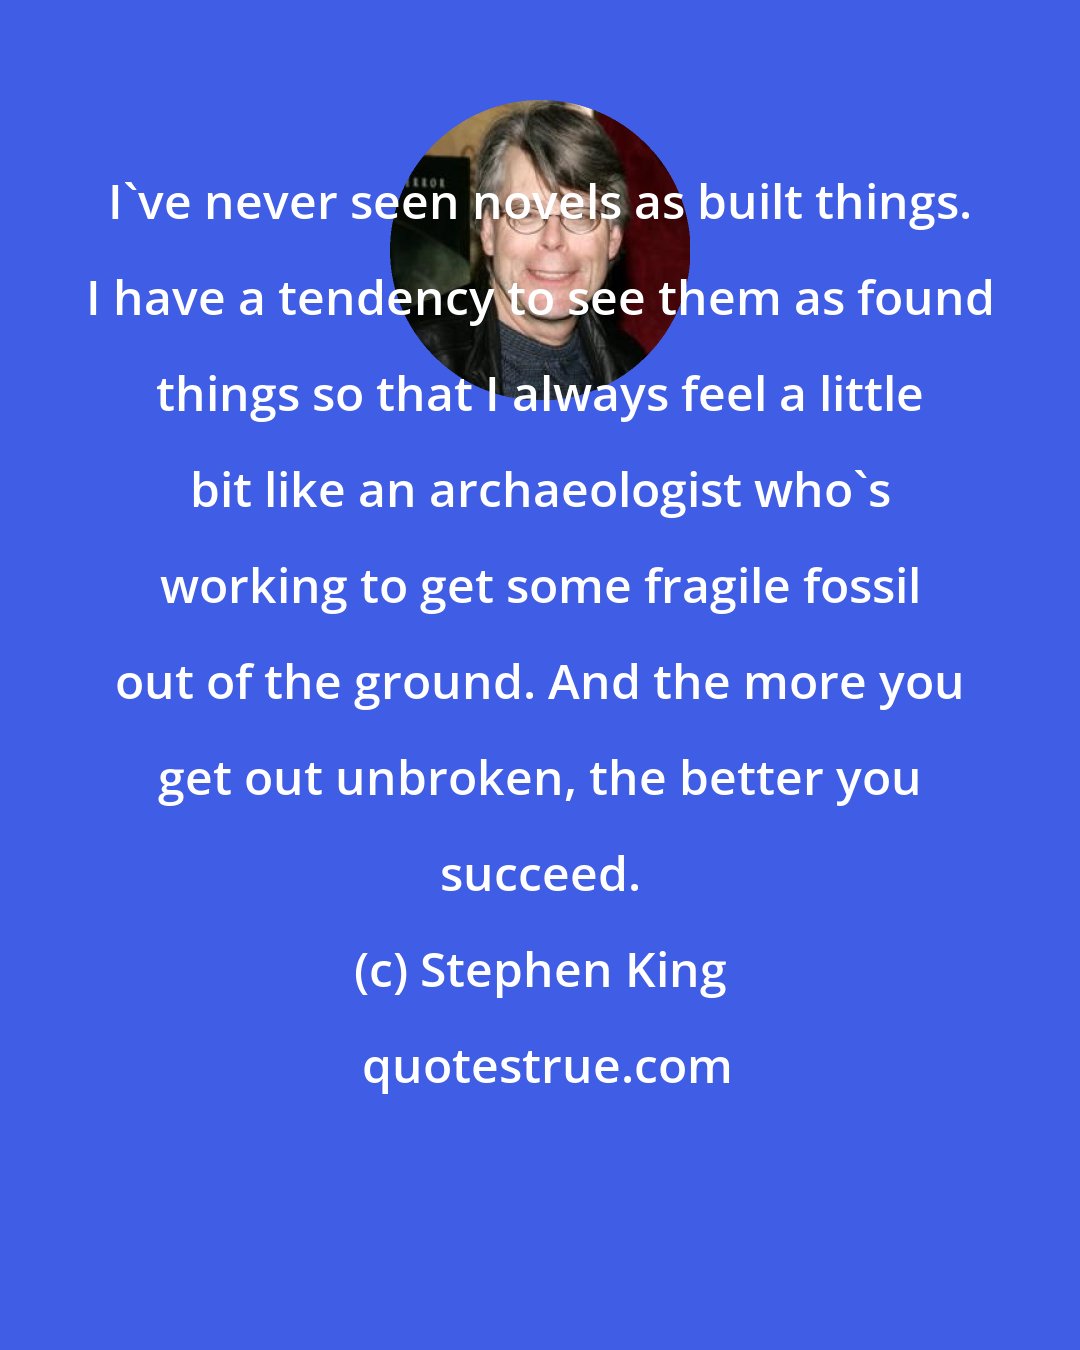 Stephen King: I've never seen novels as built things. I have a tendency to see them as found things so that I always feel a little bit like an archaeologist who's working to get some fragile fossil out of the ground. And the more you get out unbroken, the better you succeed.